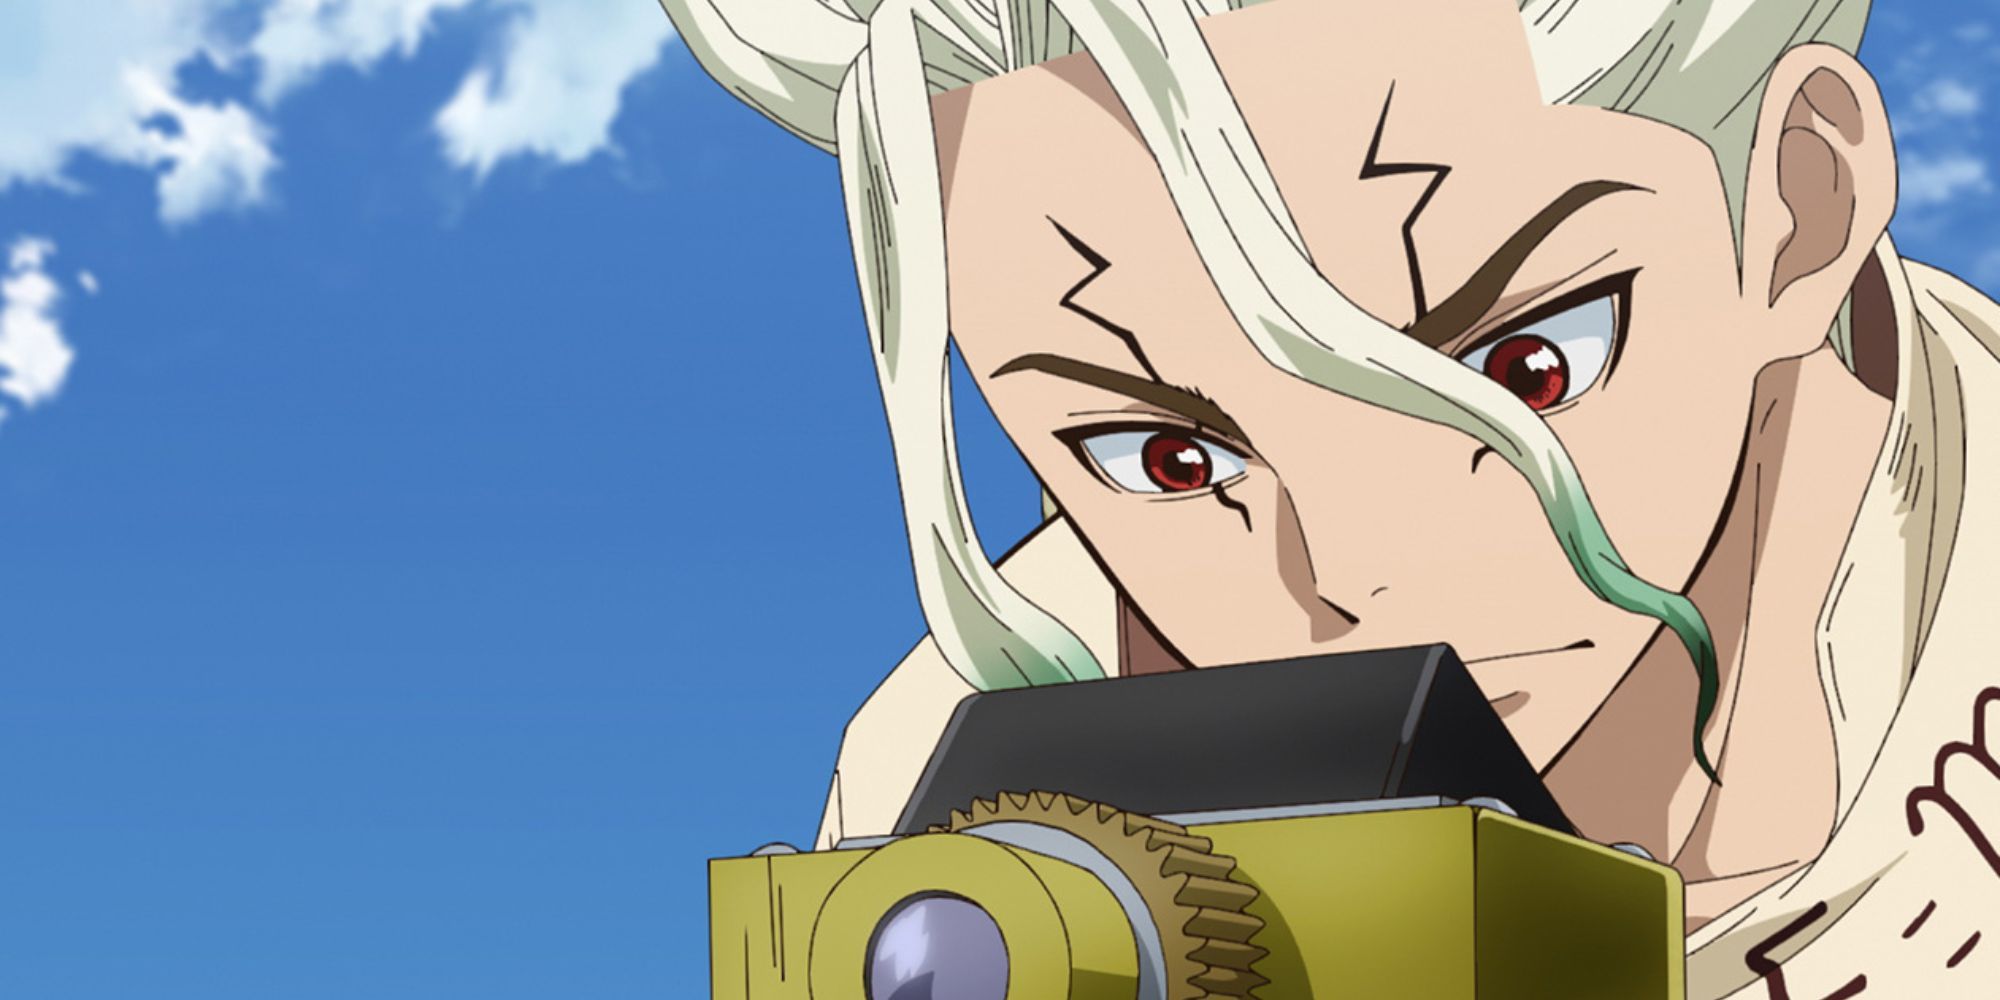 Dr Stone season 3 episode 3 release date and time